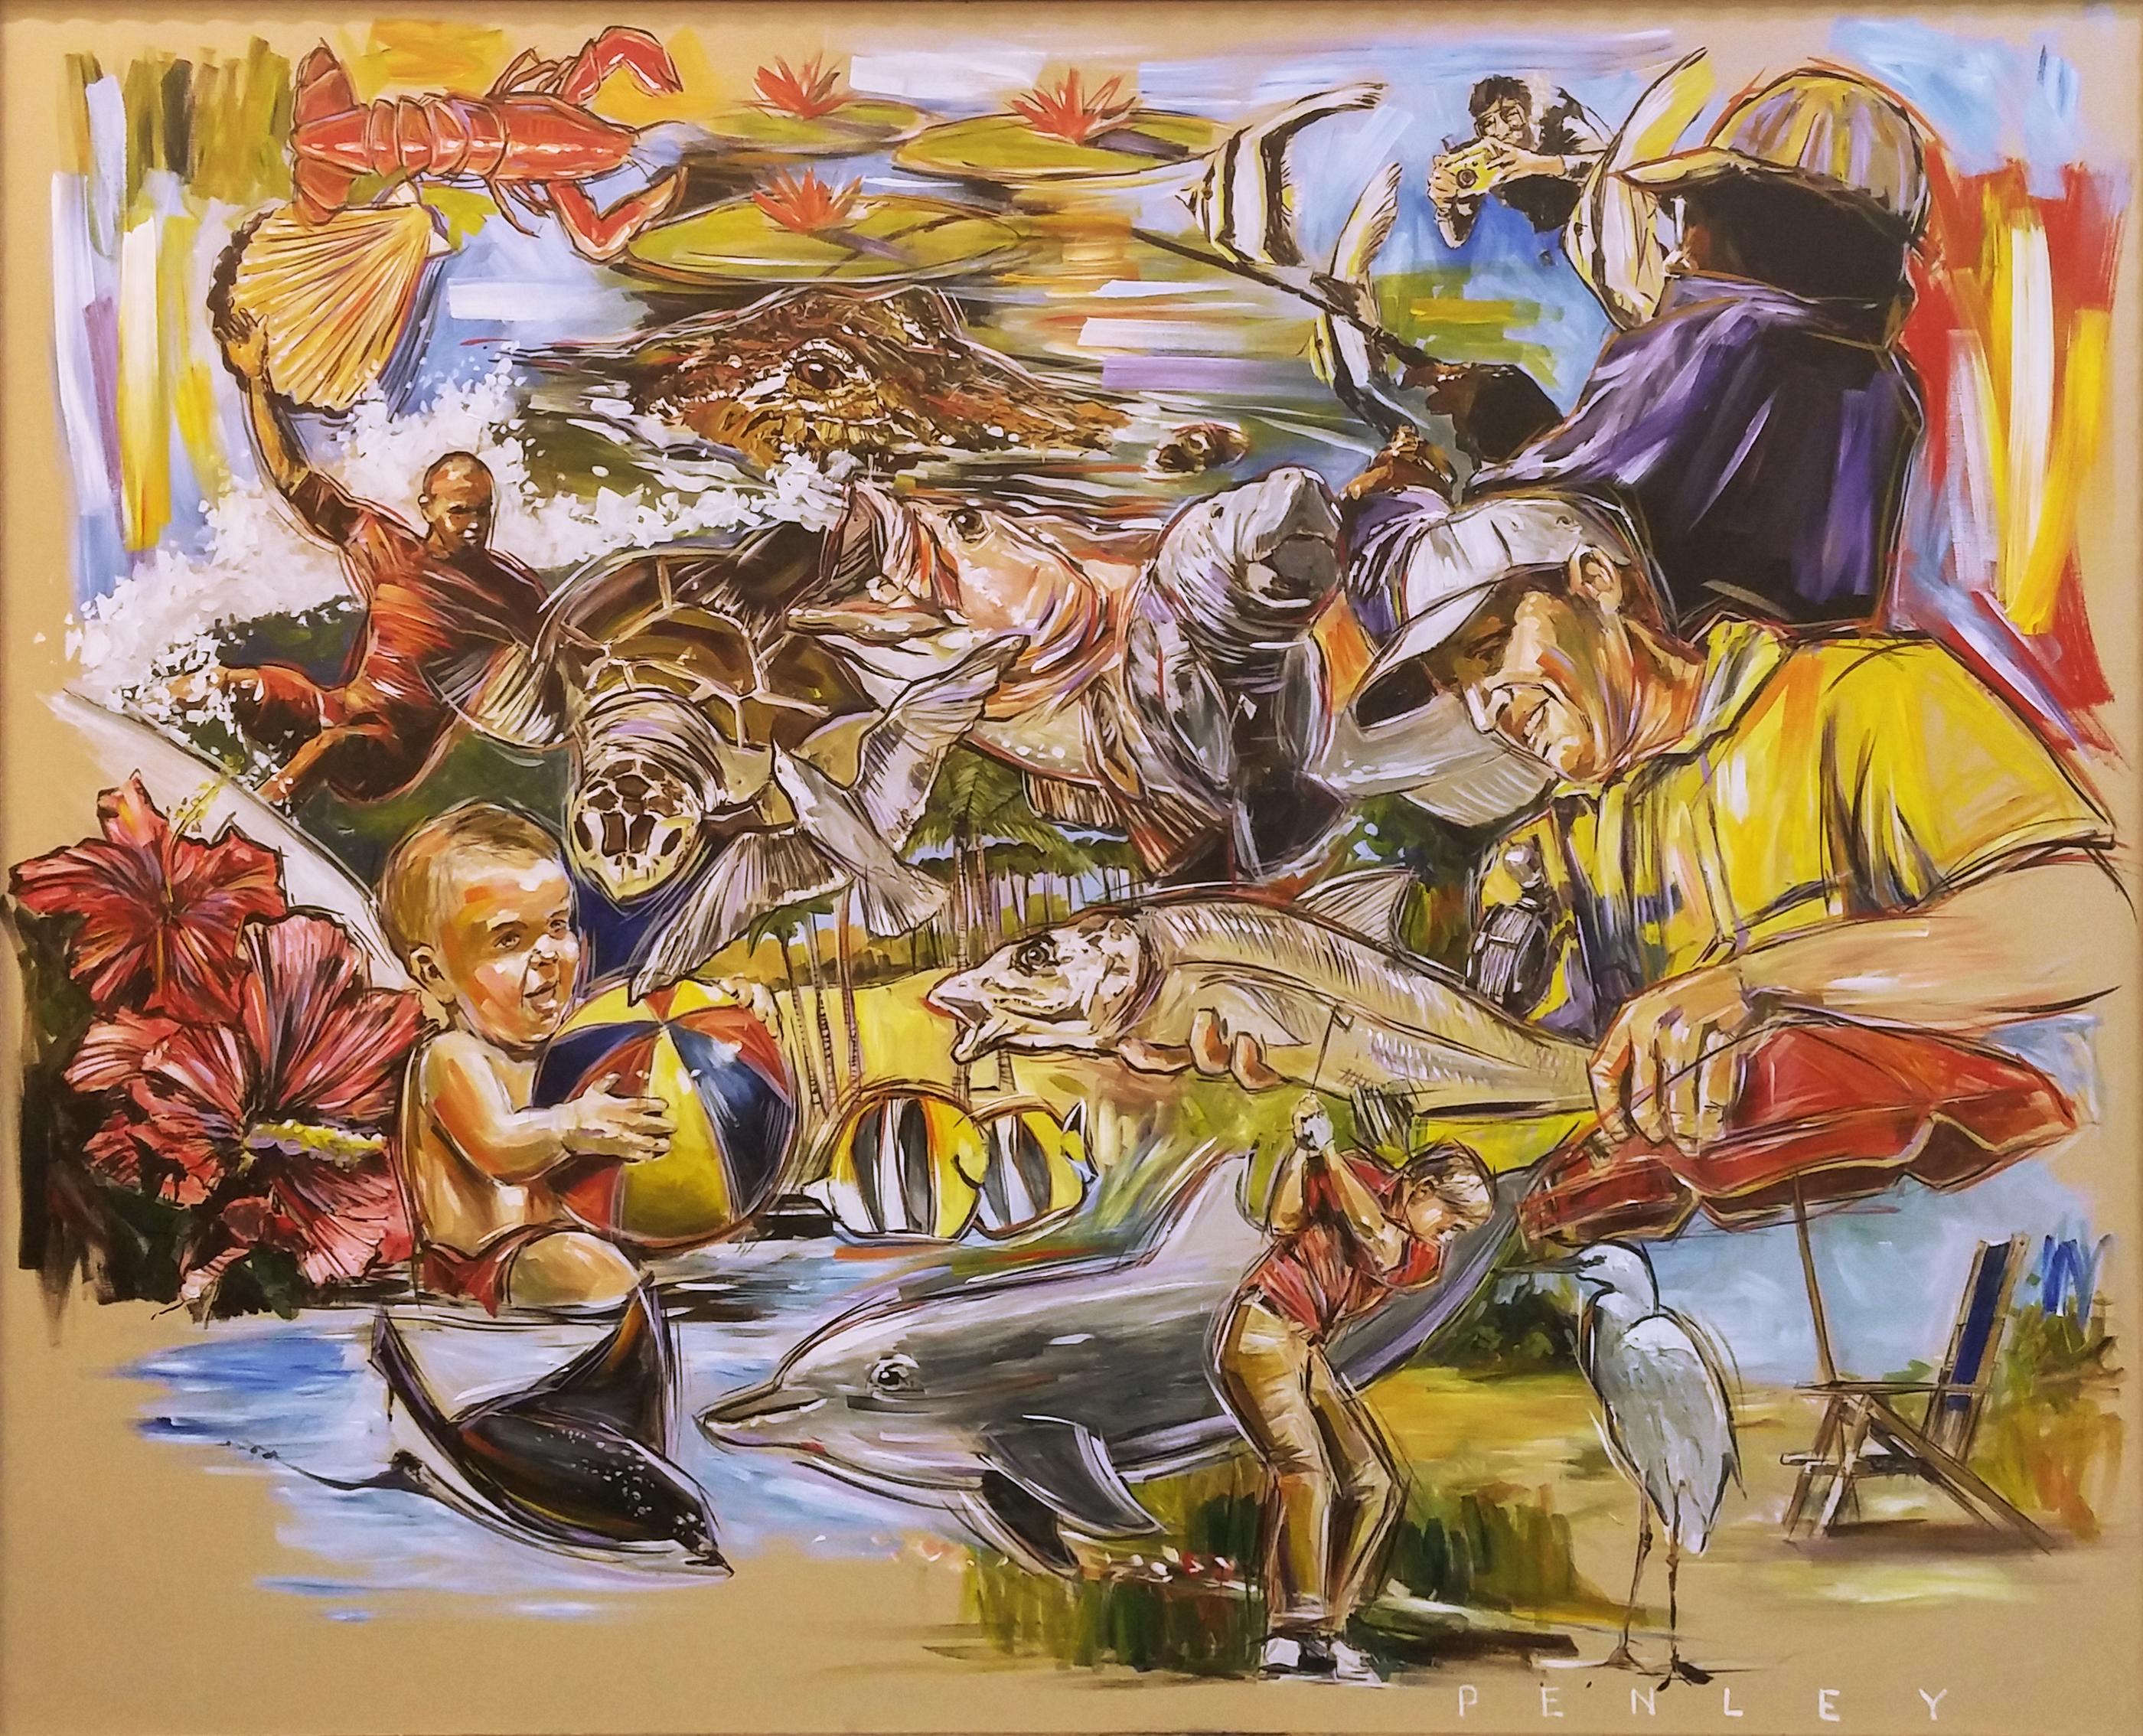 UNTITLED (OUTDOOR ACTIVITIES) - Painting by Steve Penley